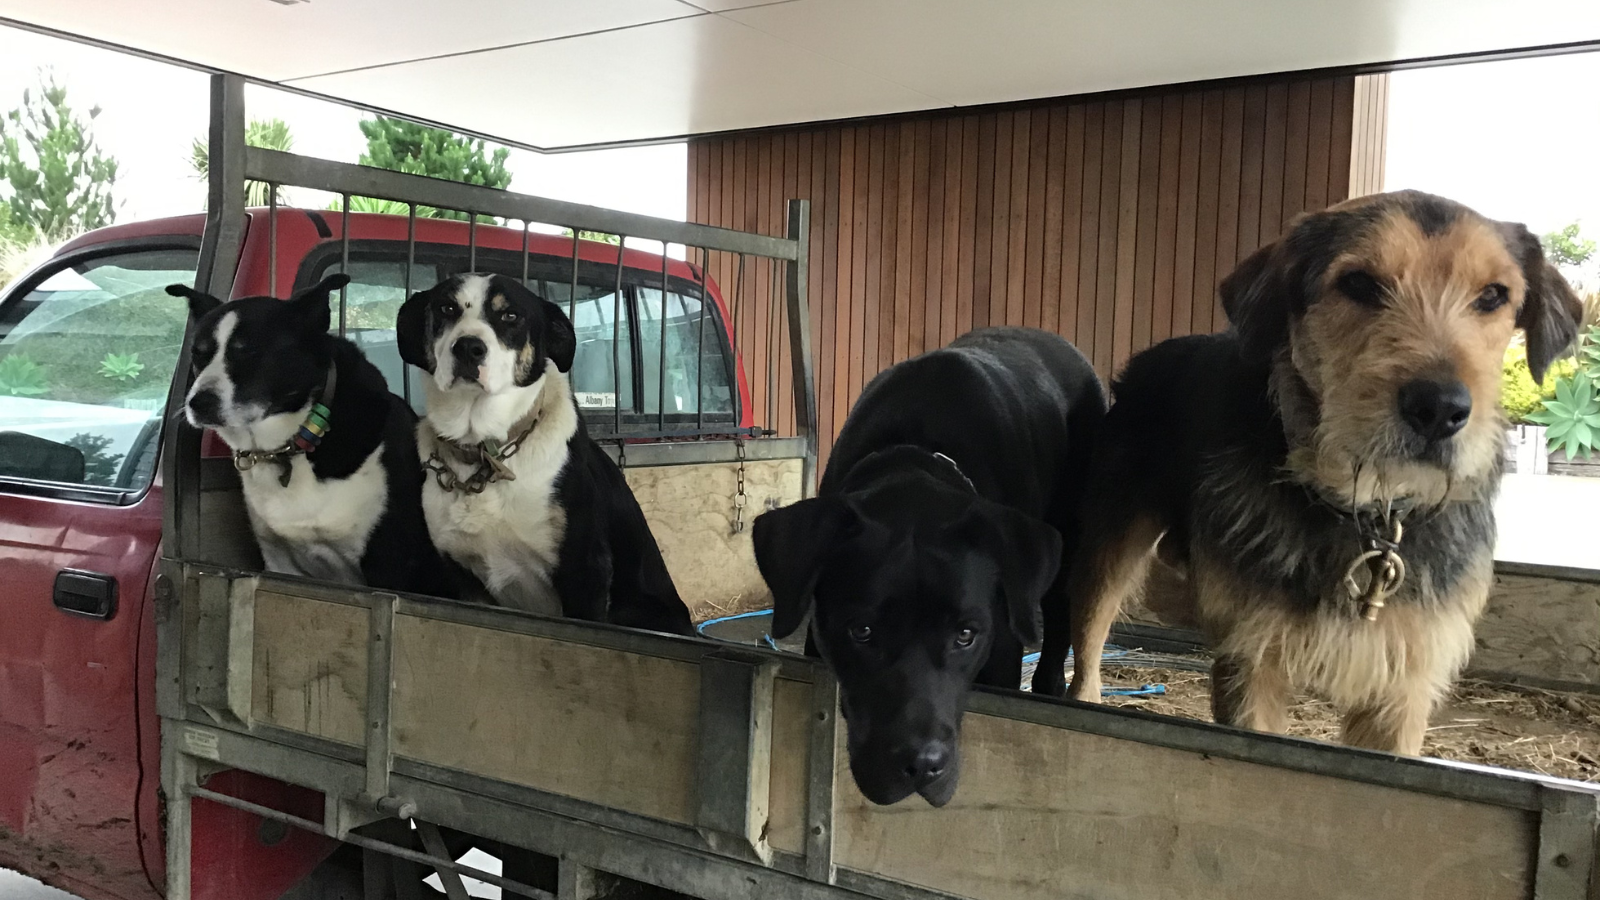 Dogs on hand - asset or livestock?